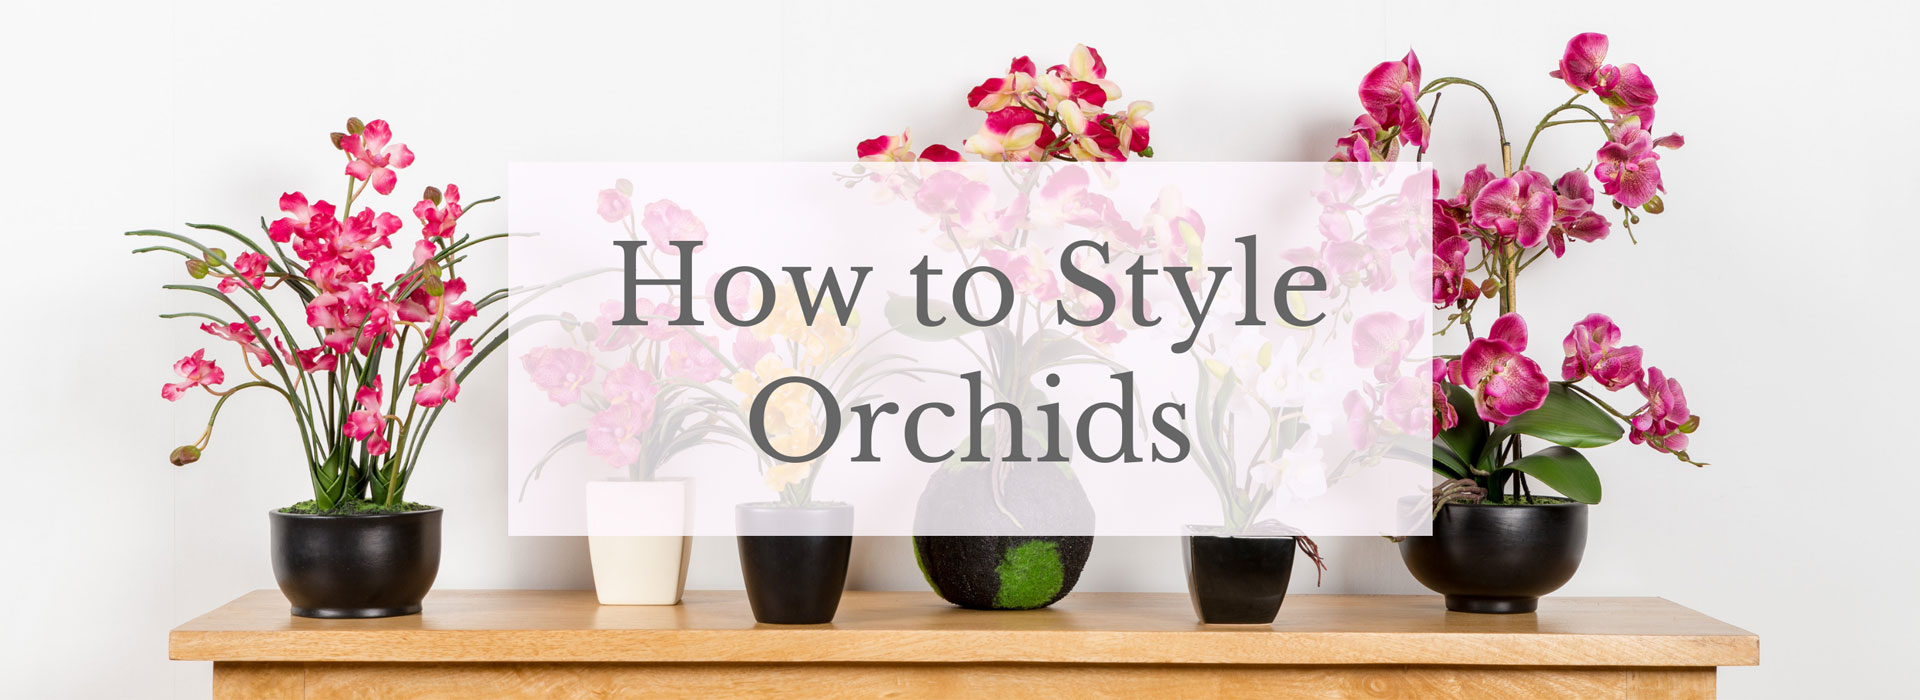 Styling Orchids banner